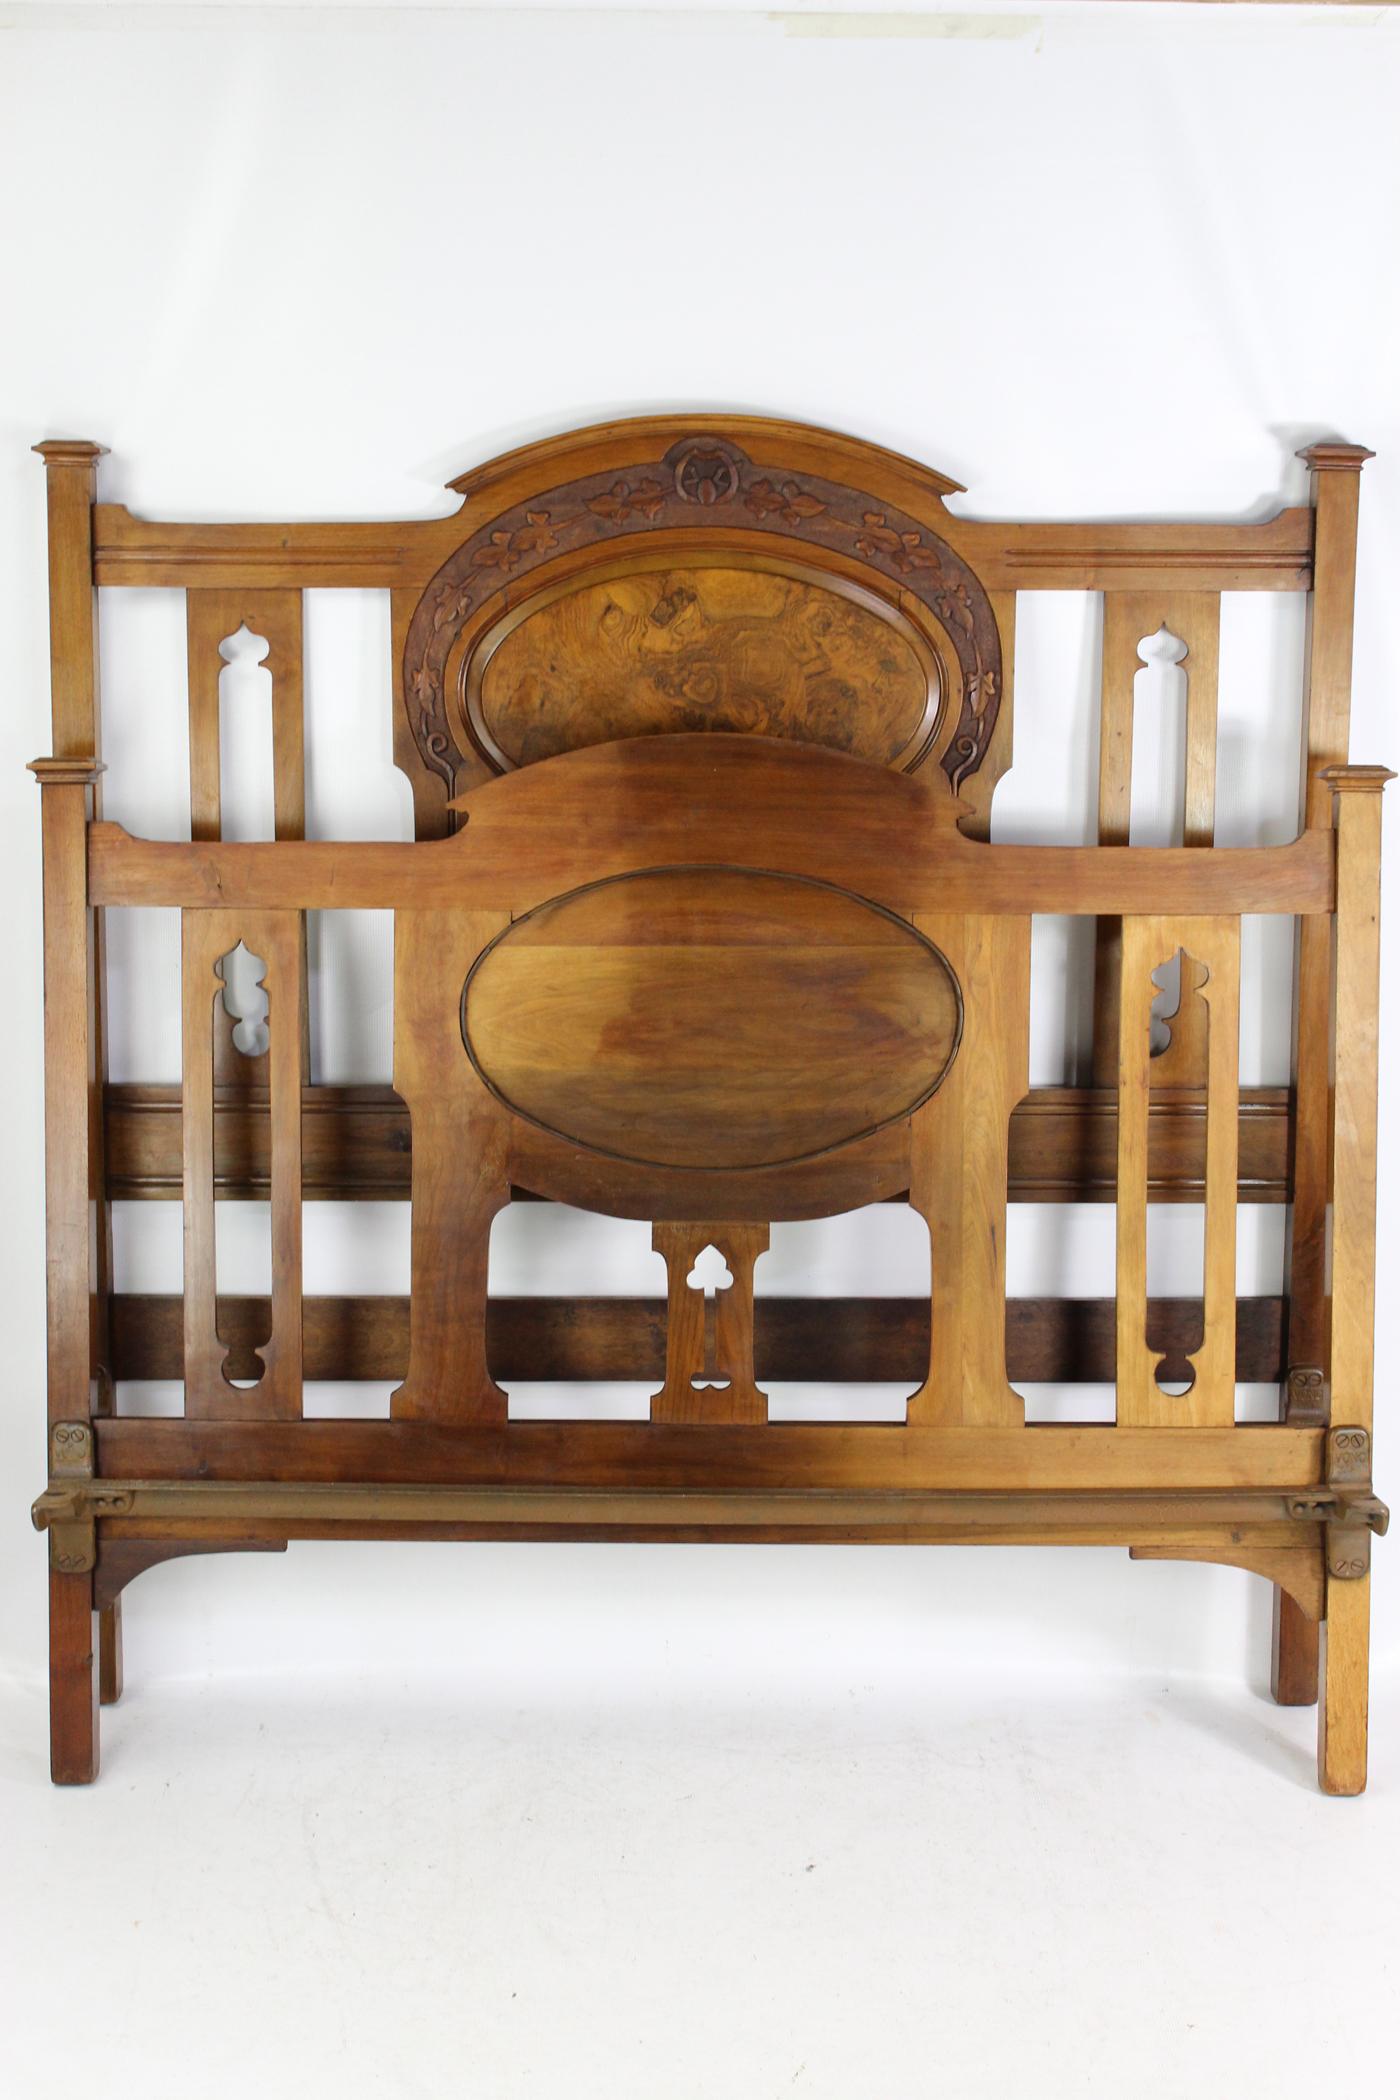 A charming antique Victorian Arts & Crafts carved walnut double bed dating from circa 1890. The headboard and footboard in a richly figured walnut frame with attractive foliate carved top rail and central burr walnut panel above vertical slats with